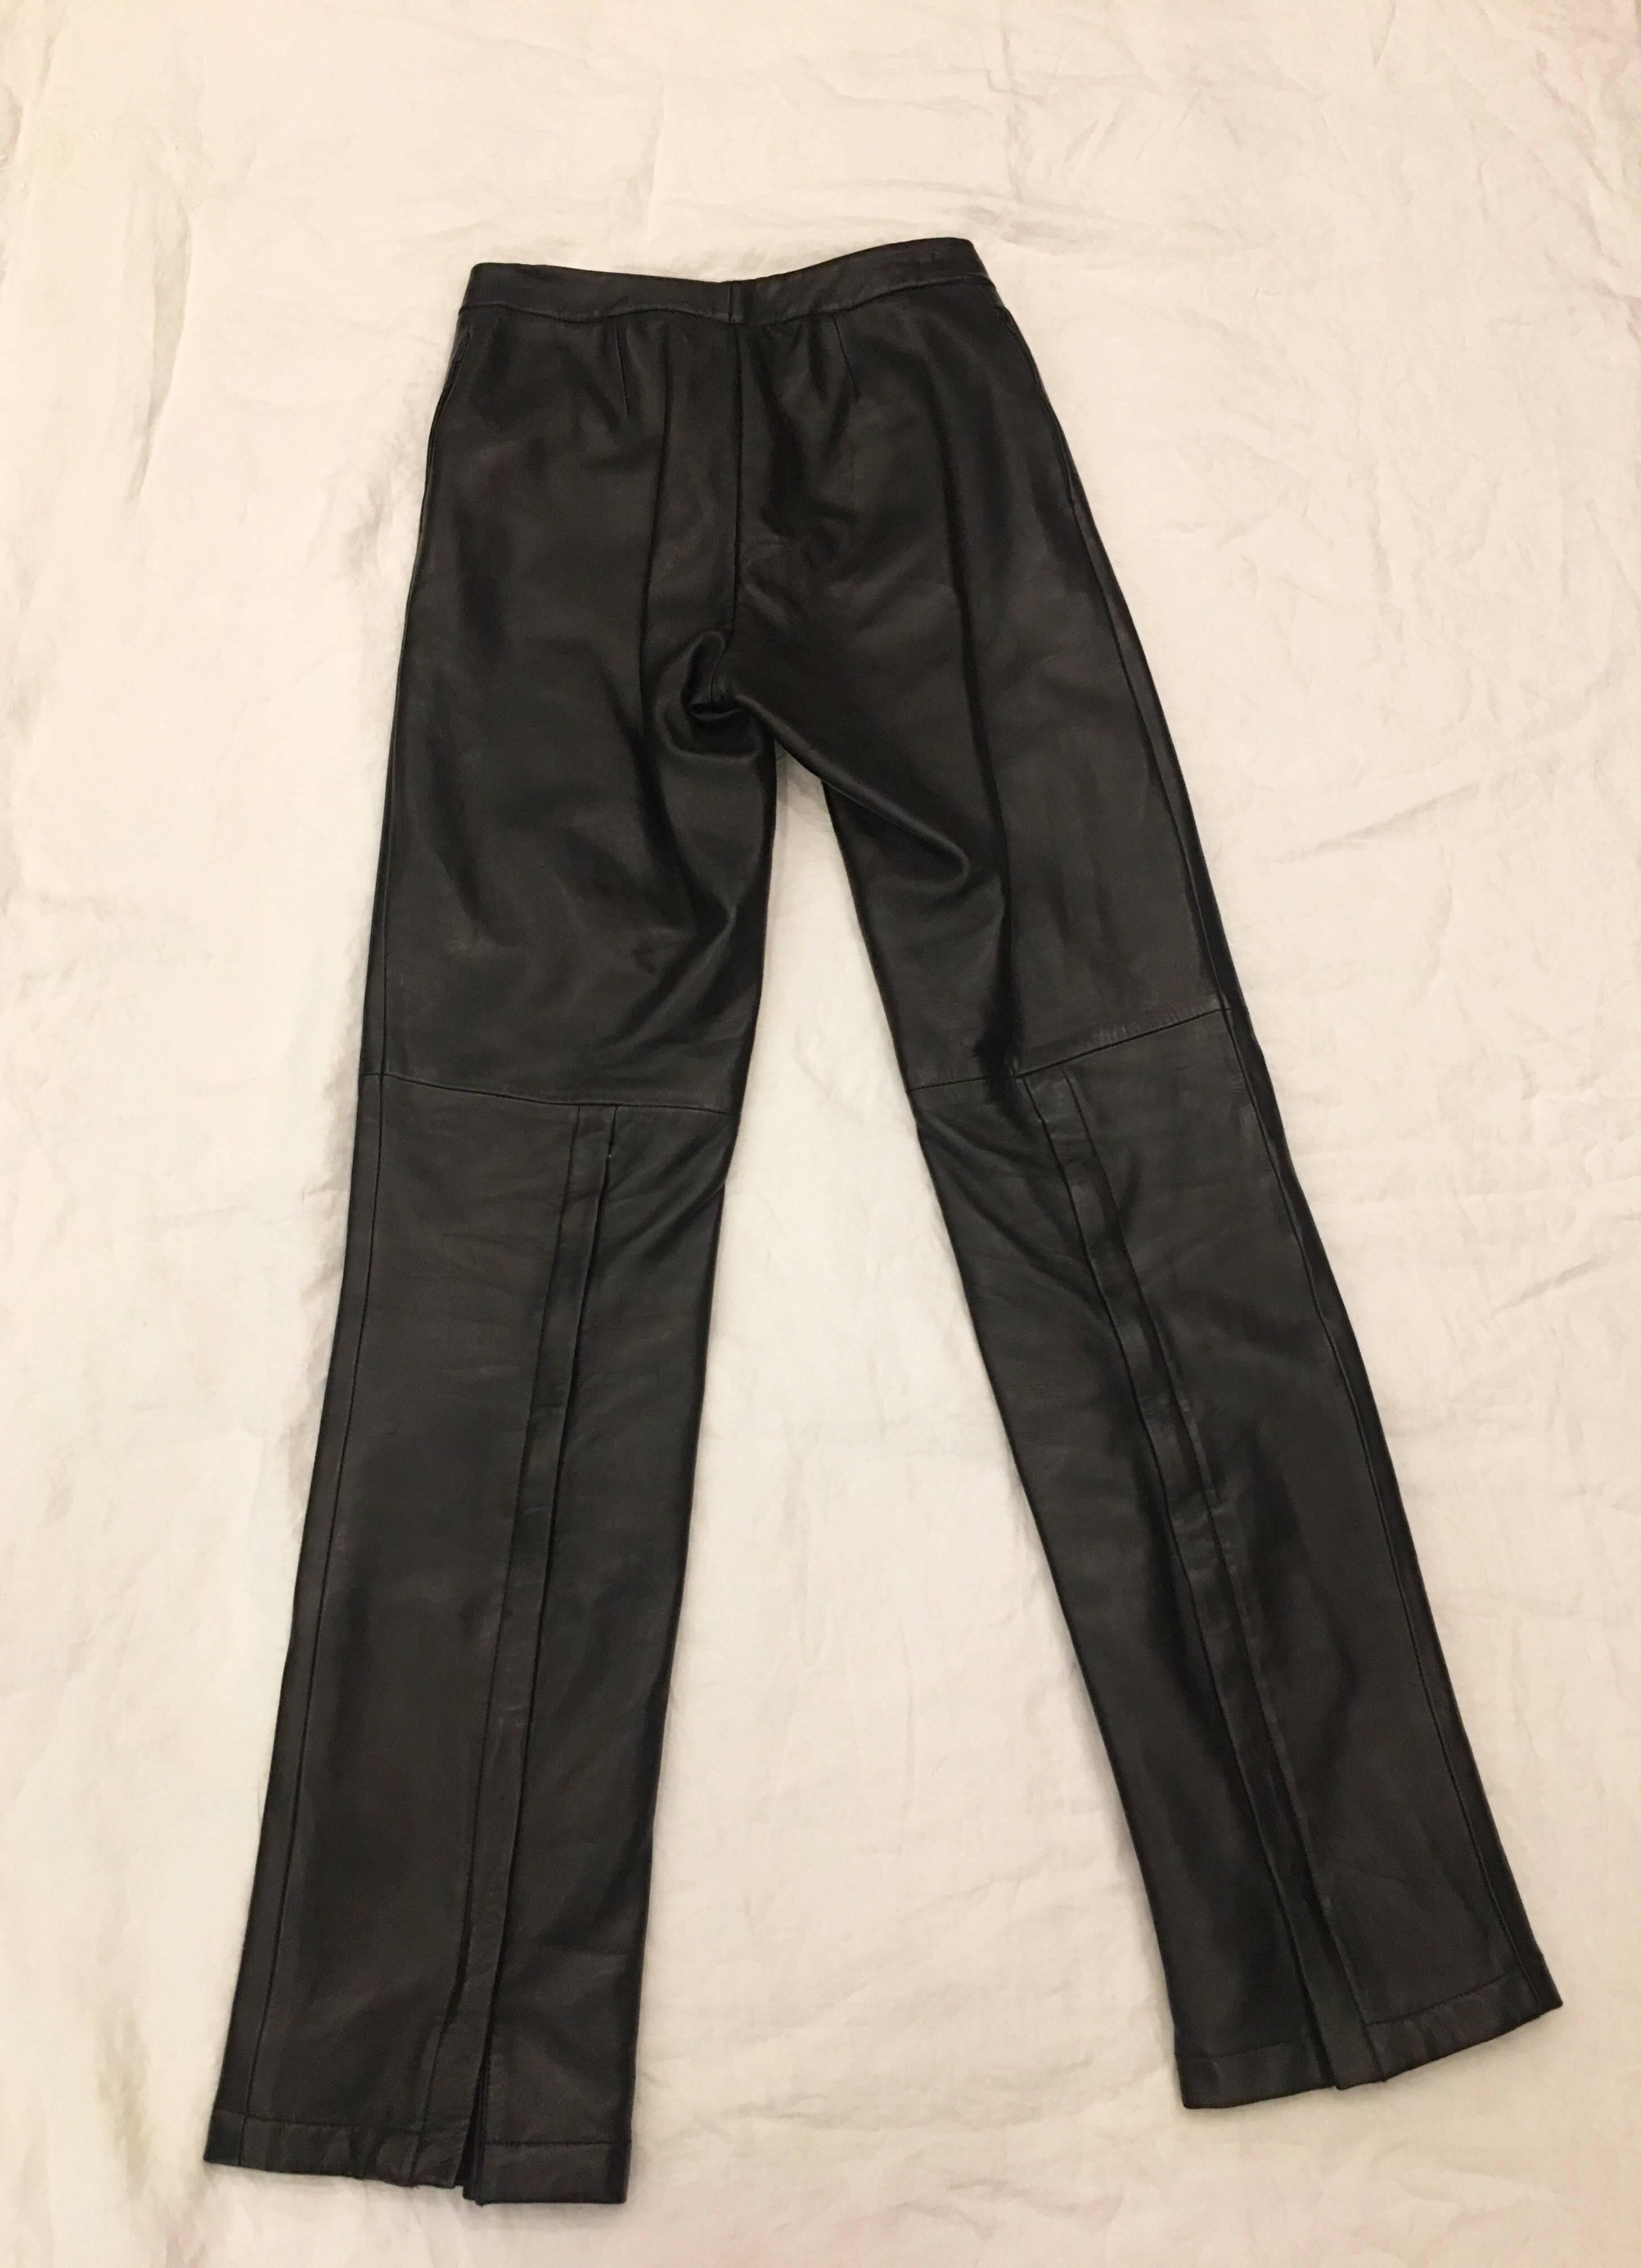 Perfect buttery soft brown leather pants by Gucci. Zippers up to right above calf. Hook and eye and zipper closure at waist. Zipper pockets on side of pants. 